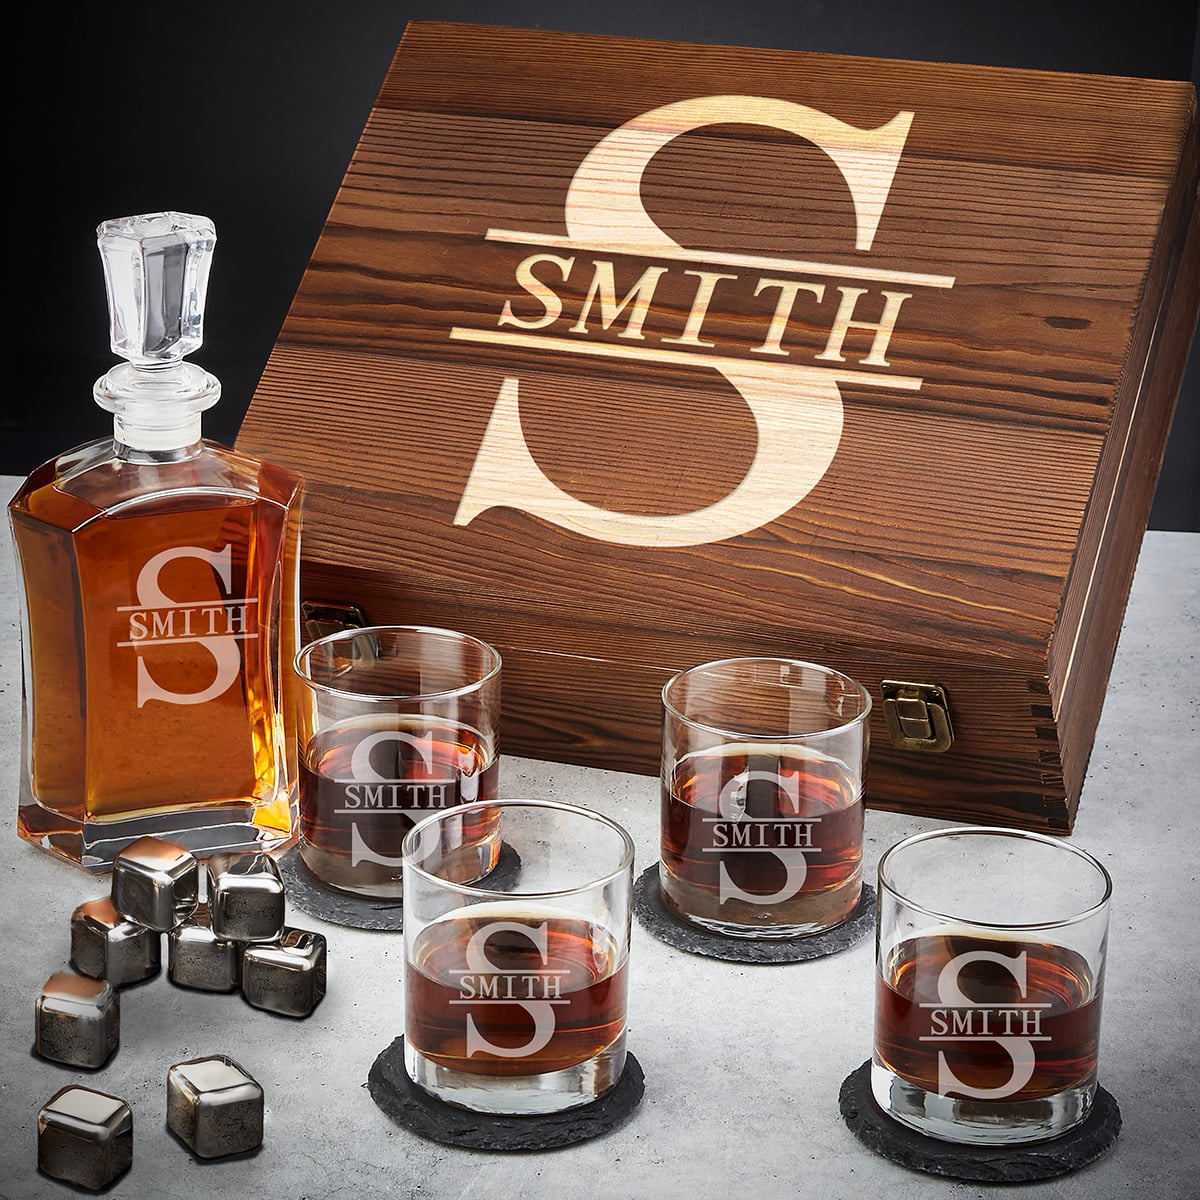 Ashcroft Personalized Whiskey Decanter Set 12pc with Whiskey Stones and Wood Box